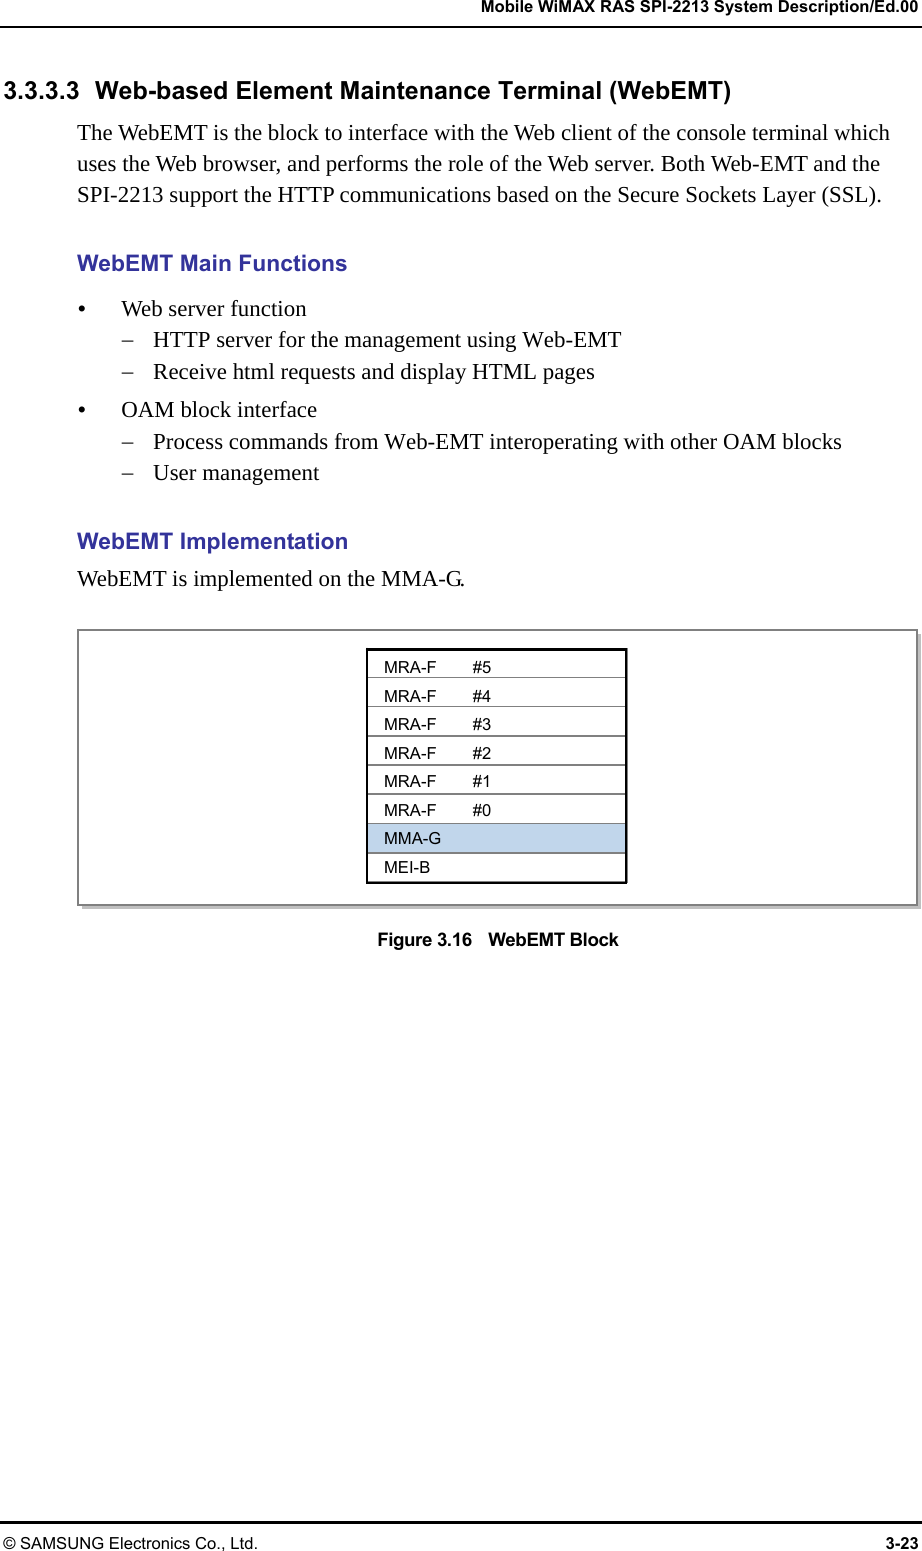   Mobile WiMAX RAS SPI-2213 System Description/Ed.00 © SAMSUNG Electronics Co., Ltd.  3-23 3.3.3.3 Web-based Element Maintenance Terminal (WebEMT) The WebEMT is the block to interface with the Web client of the console terminal which uses the Web browser, and performs the role of the Web server. Both Web-EMT and the SPI-2213 support the HTTP communications based on the Secure Sockets Layer (SSL).  WebEMT Main Functions y Web server function − HTTP server for the management using Web-EMT − Receive html requests and display HTML pages y OAM block interface − Process commands from Web-EMT interoperating with other OAM blocks − User management  WebEMT Implementation WebEMT is implemented on the MMA-G.  Figure 3.16  WebEMT Block  MRA-F #5 MRA-F #4 MRA-F #3 MRA-F #2 MRA-F #1 MRA-F #0 MMA-G MEI-B 